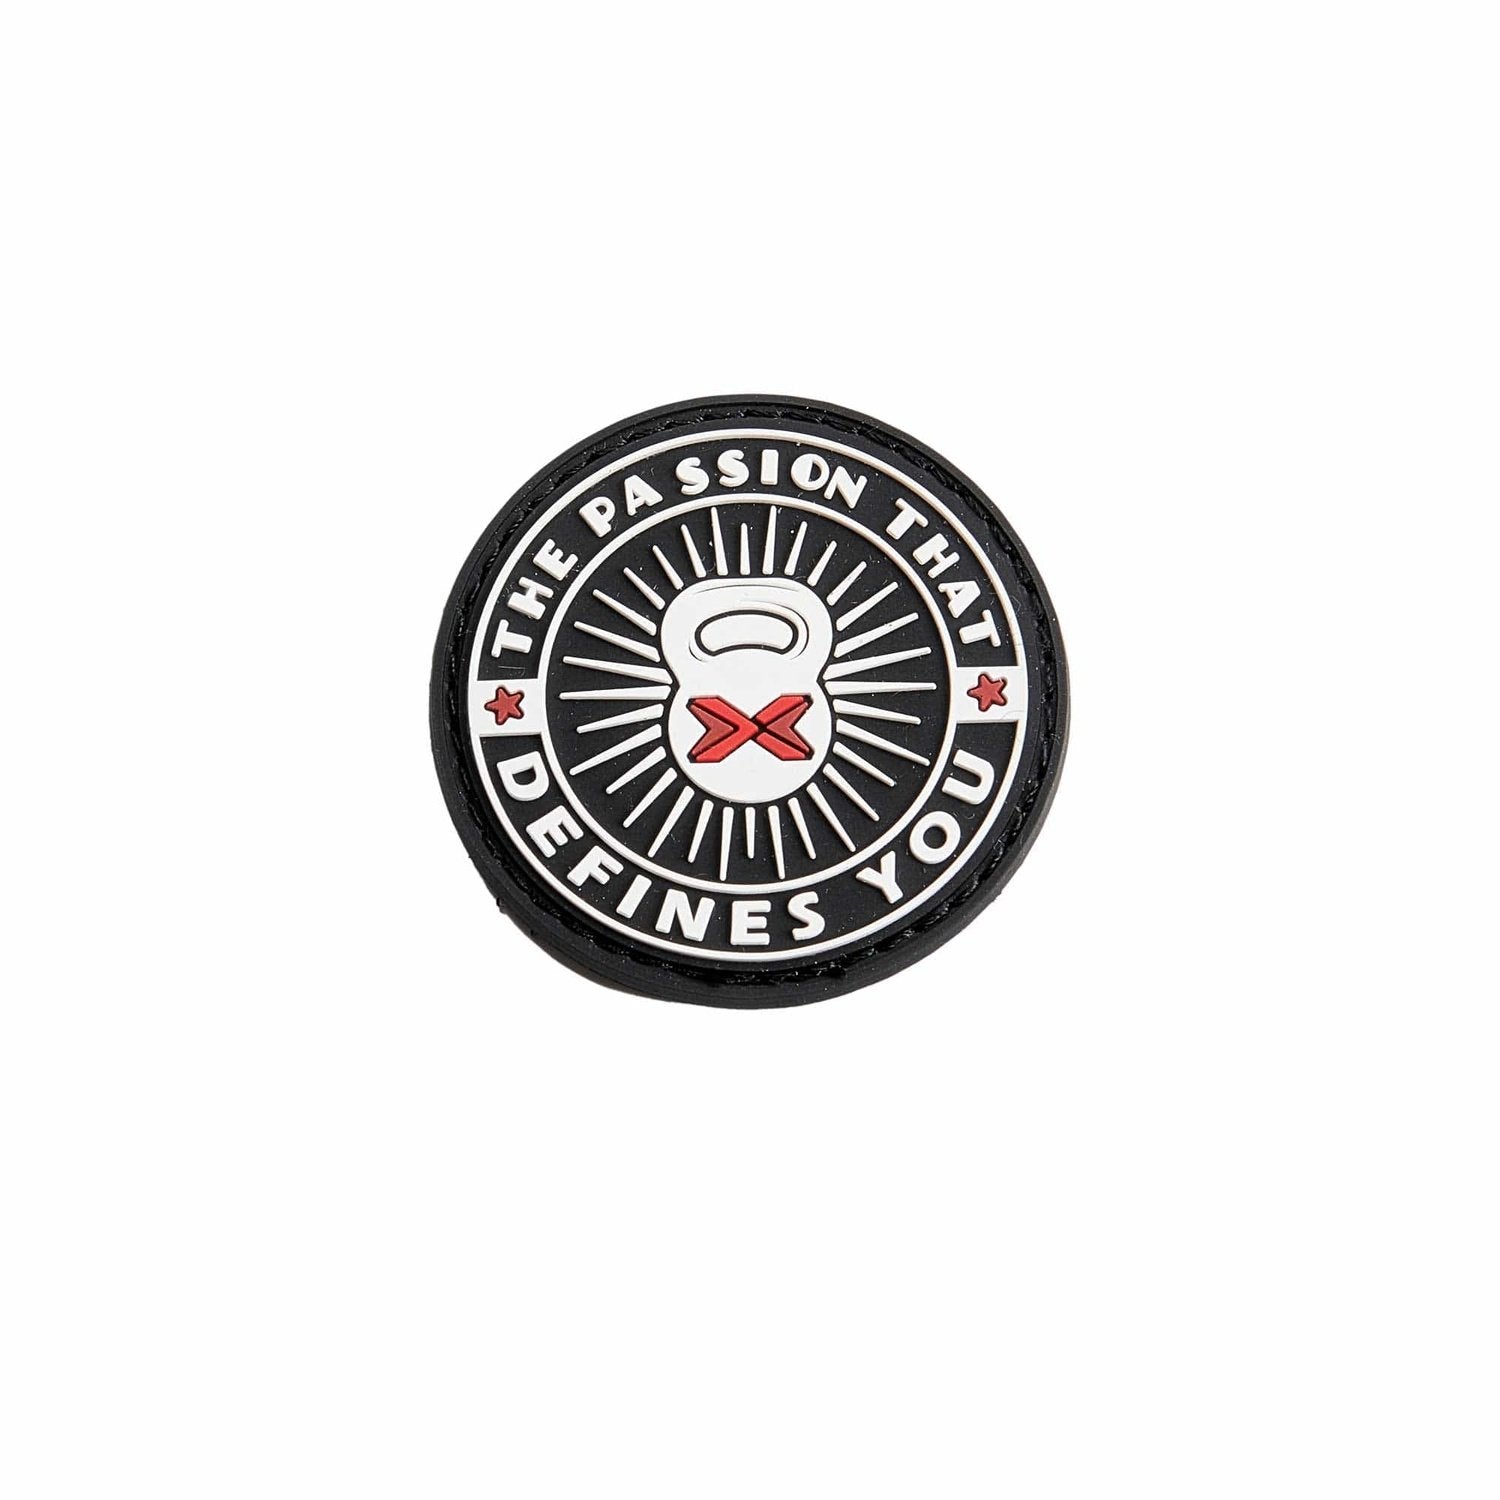 PicSil Velcro Patch "Passion That Defines You" kaufen bei HighPowered.ch